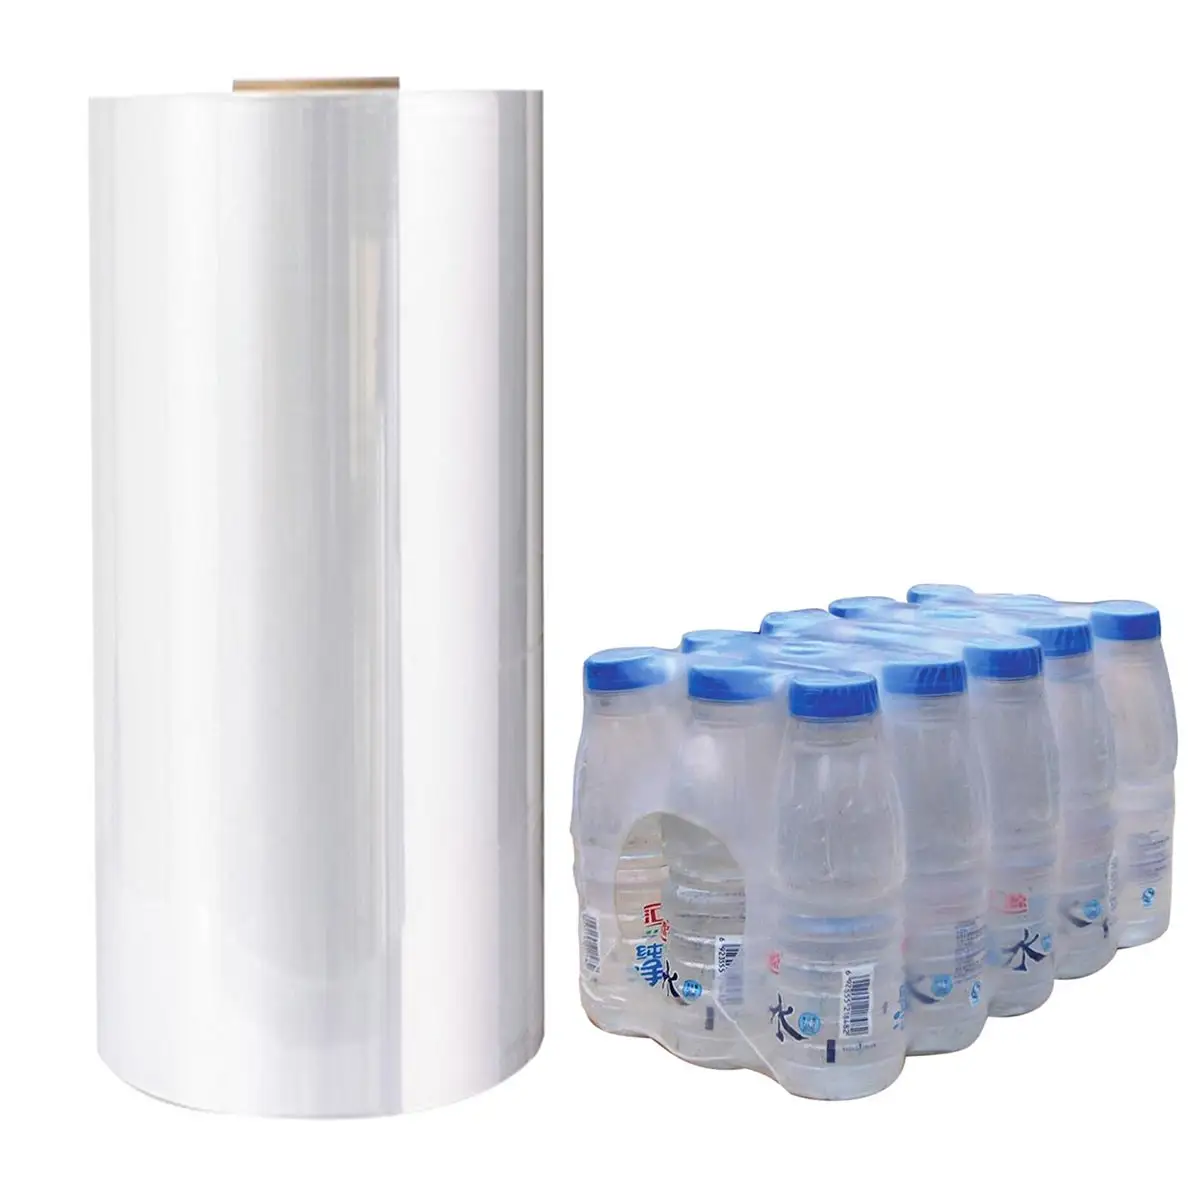 Clear PE Shrinkable Multi Pack Film Wrapping Bottles Soft Roll Shrink Wrap Plastic Film Eco Friendly Packaging for Beverages